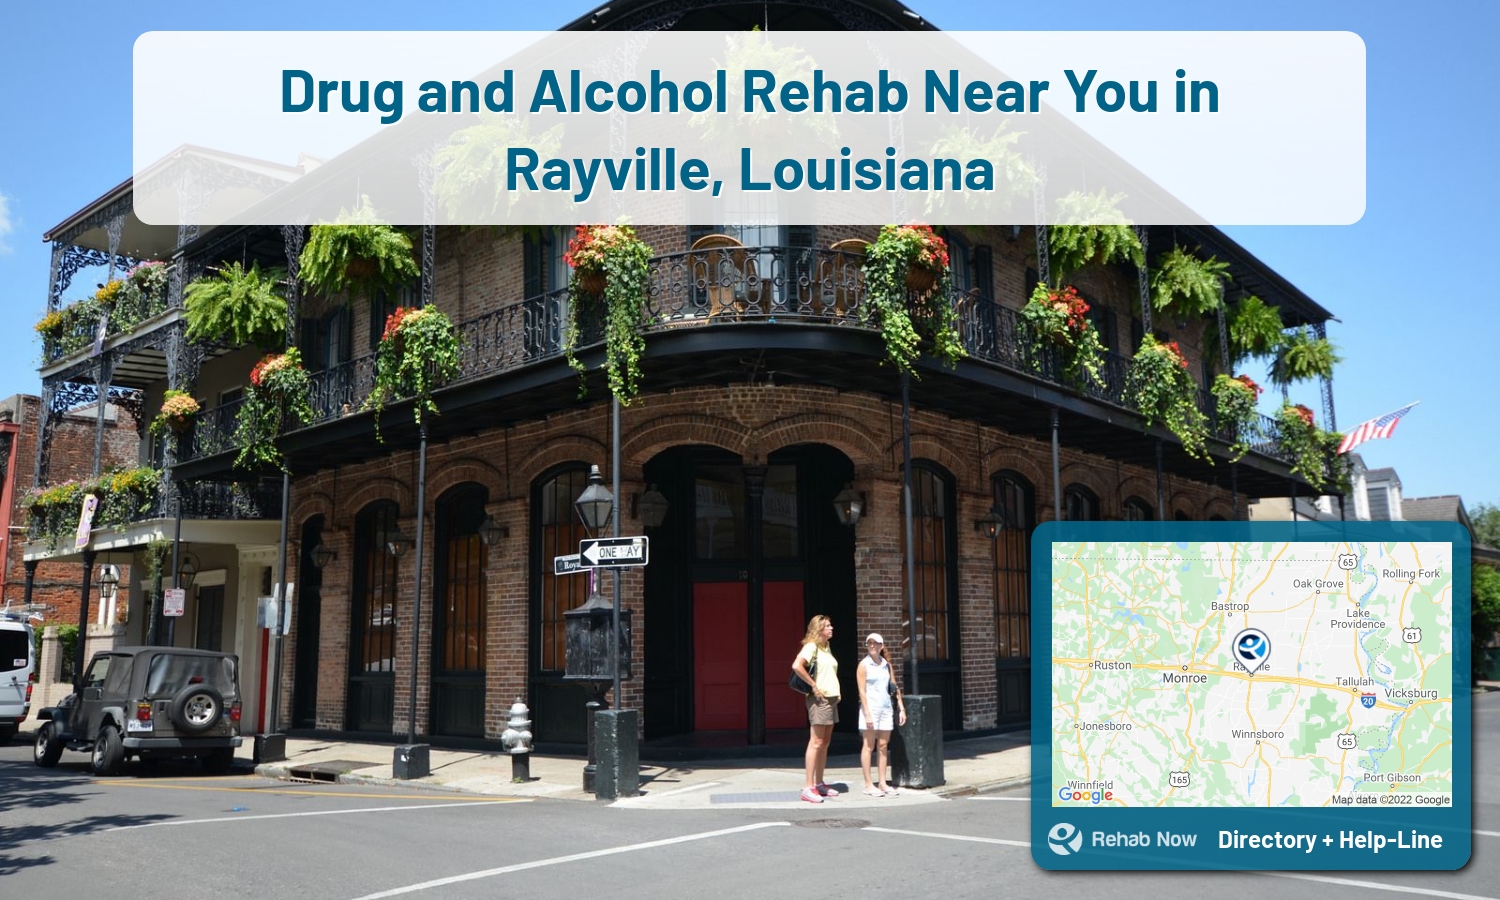 List of alcohol and drug treatment centers near you in Rayville, Louisiana. Research certifications, programs, methods, pricing, and more.